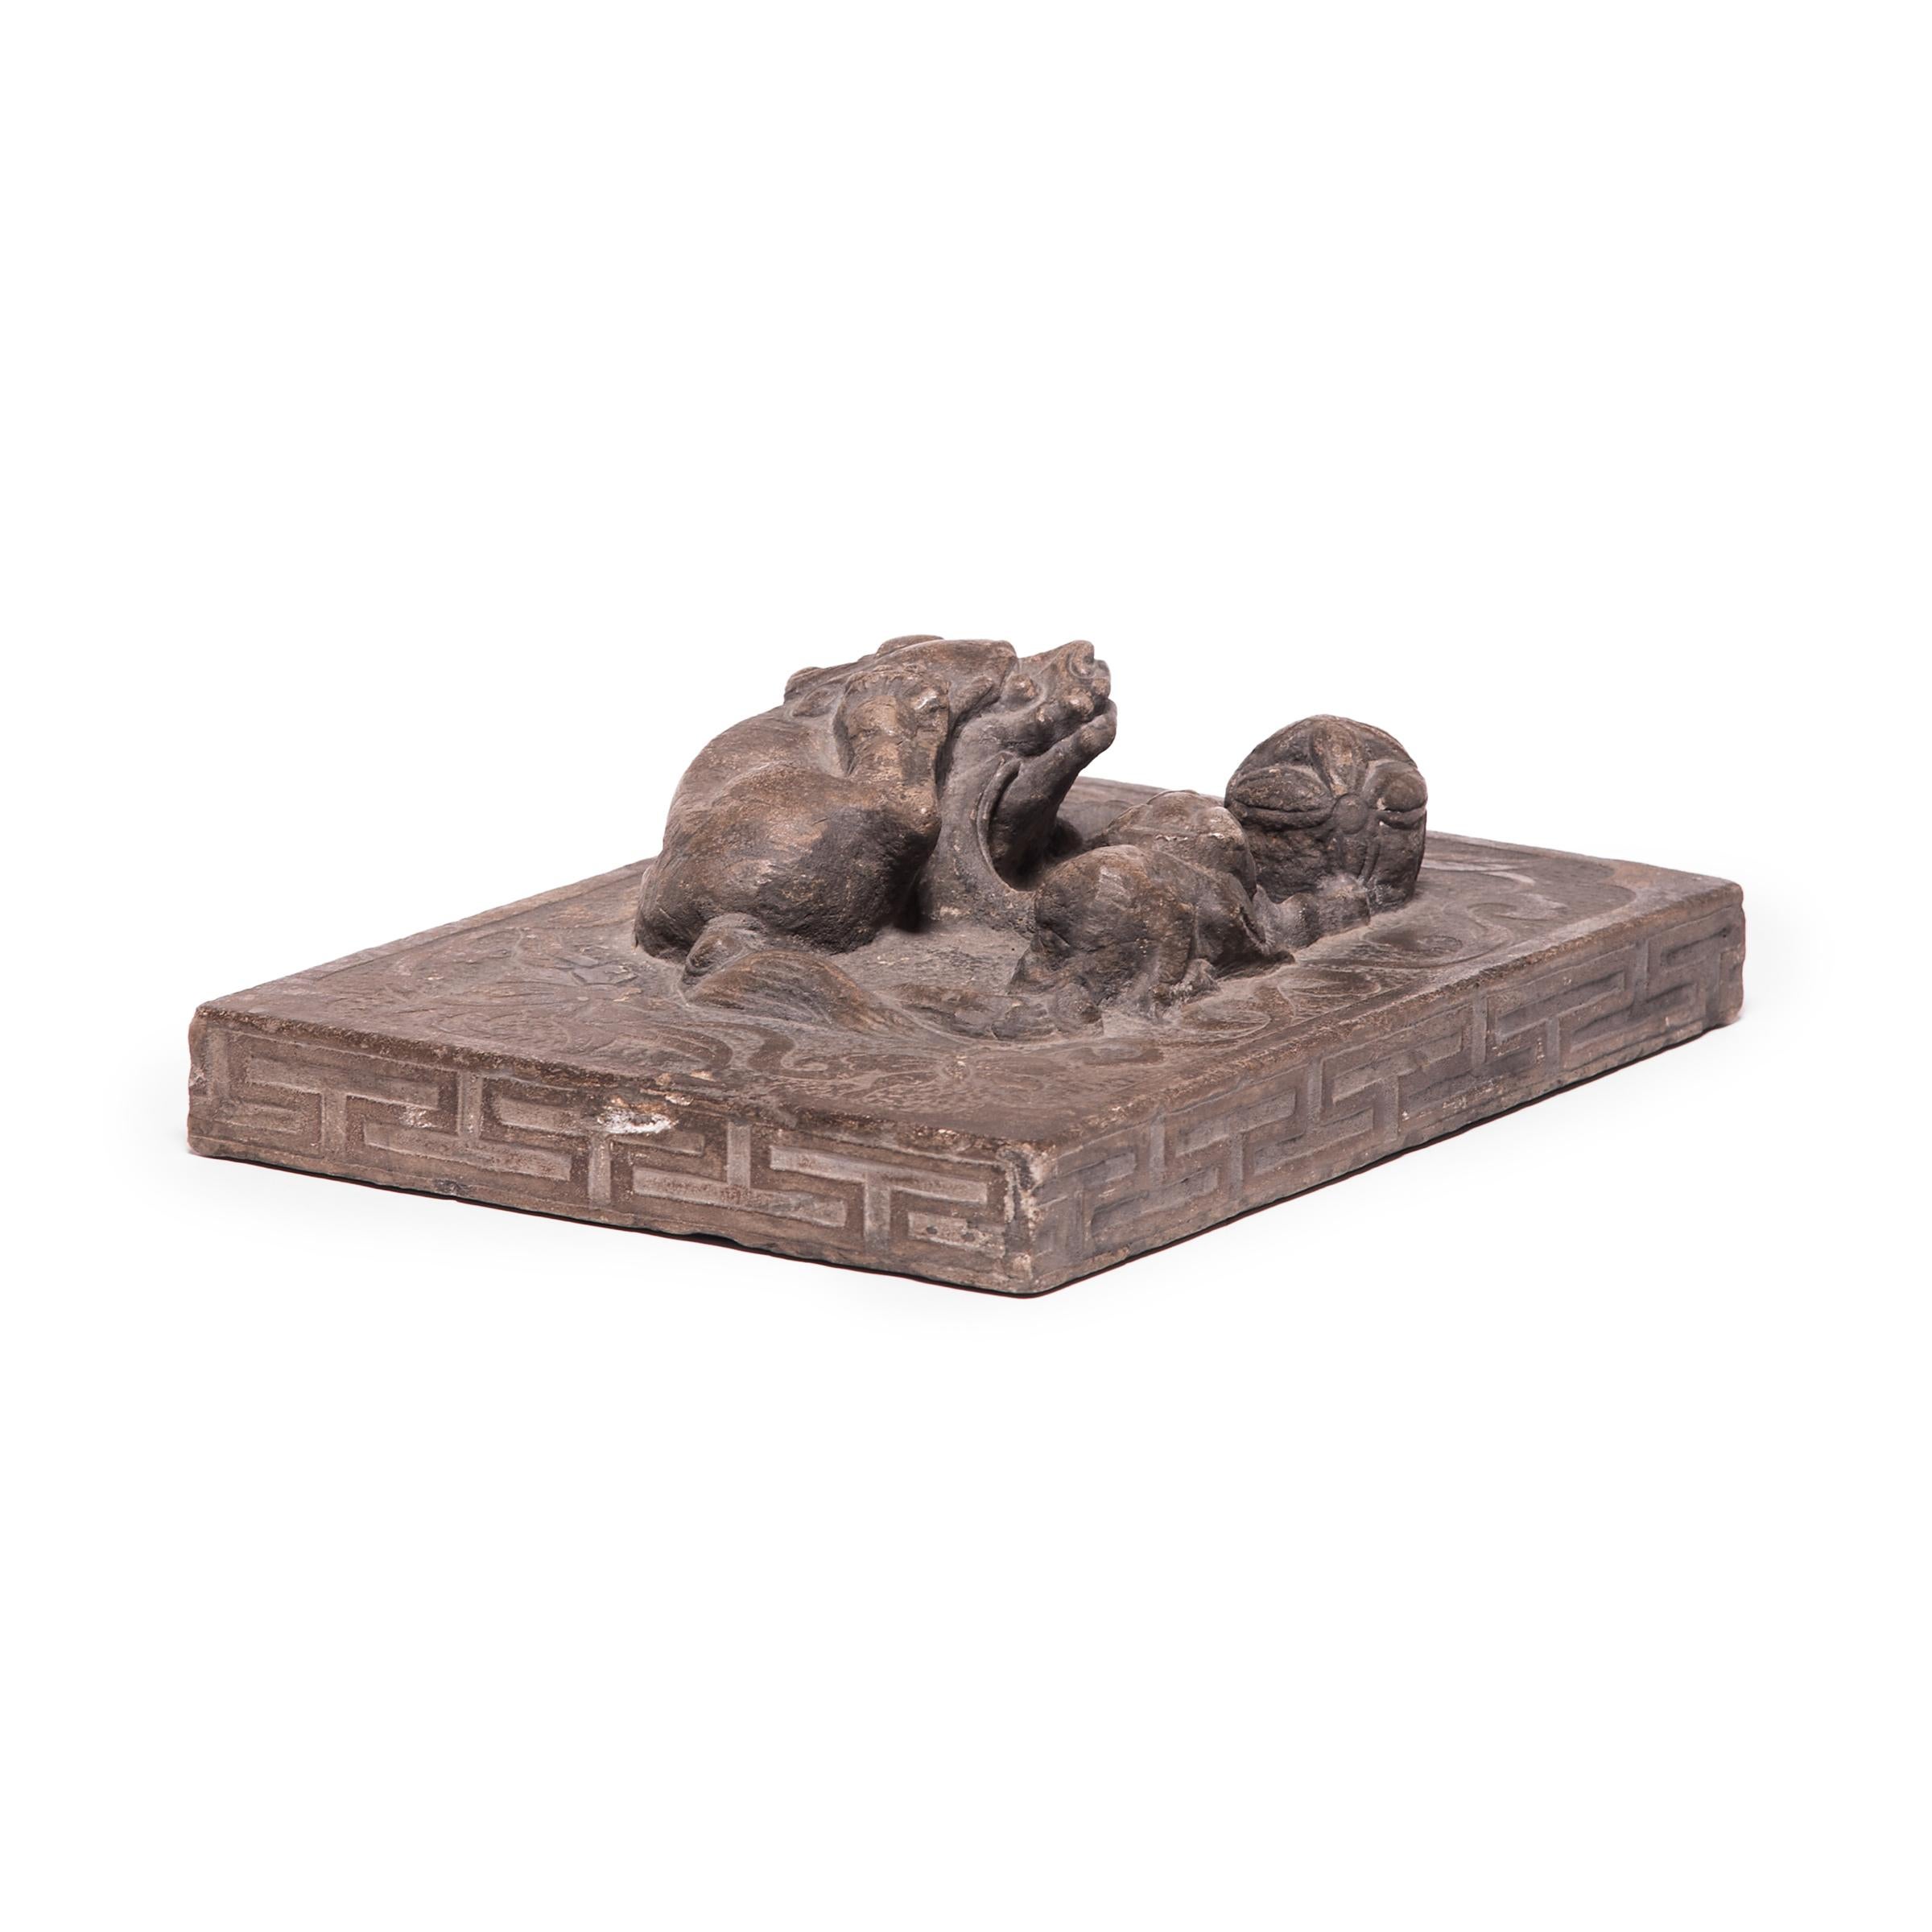 Hand-Carved Chinese Stone Shoemaker's Weight with Mother, Cub, and Embroidered Ball For Sale